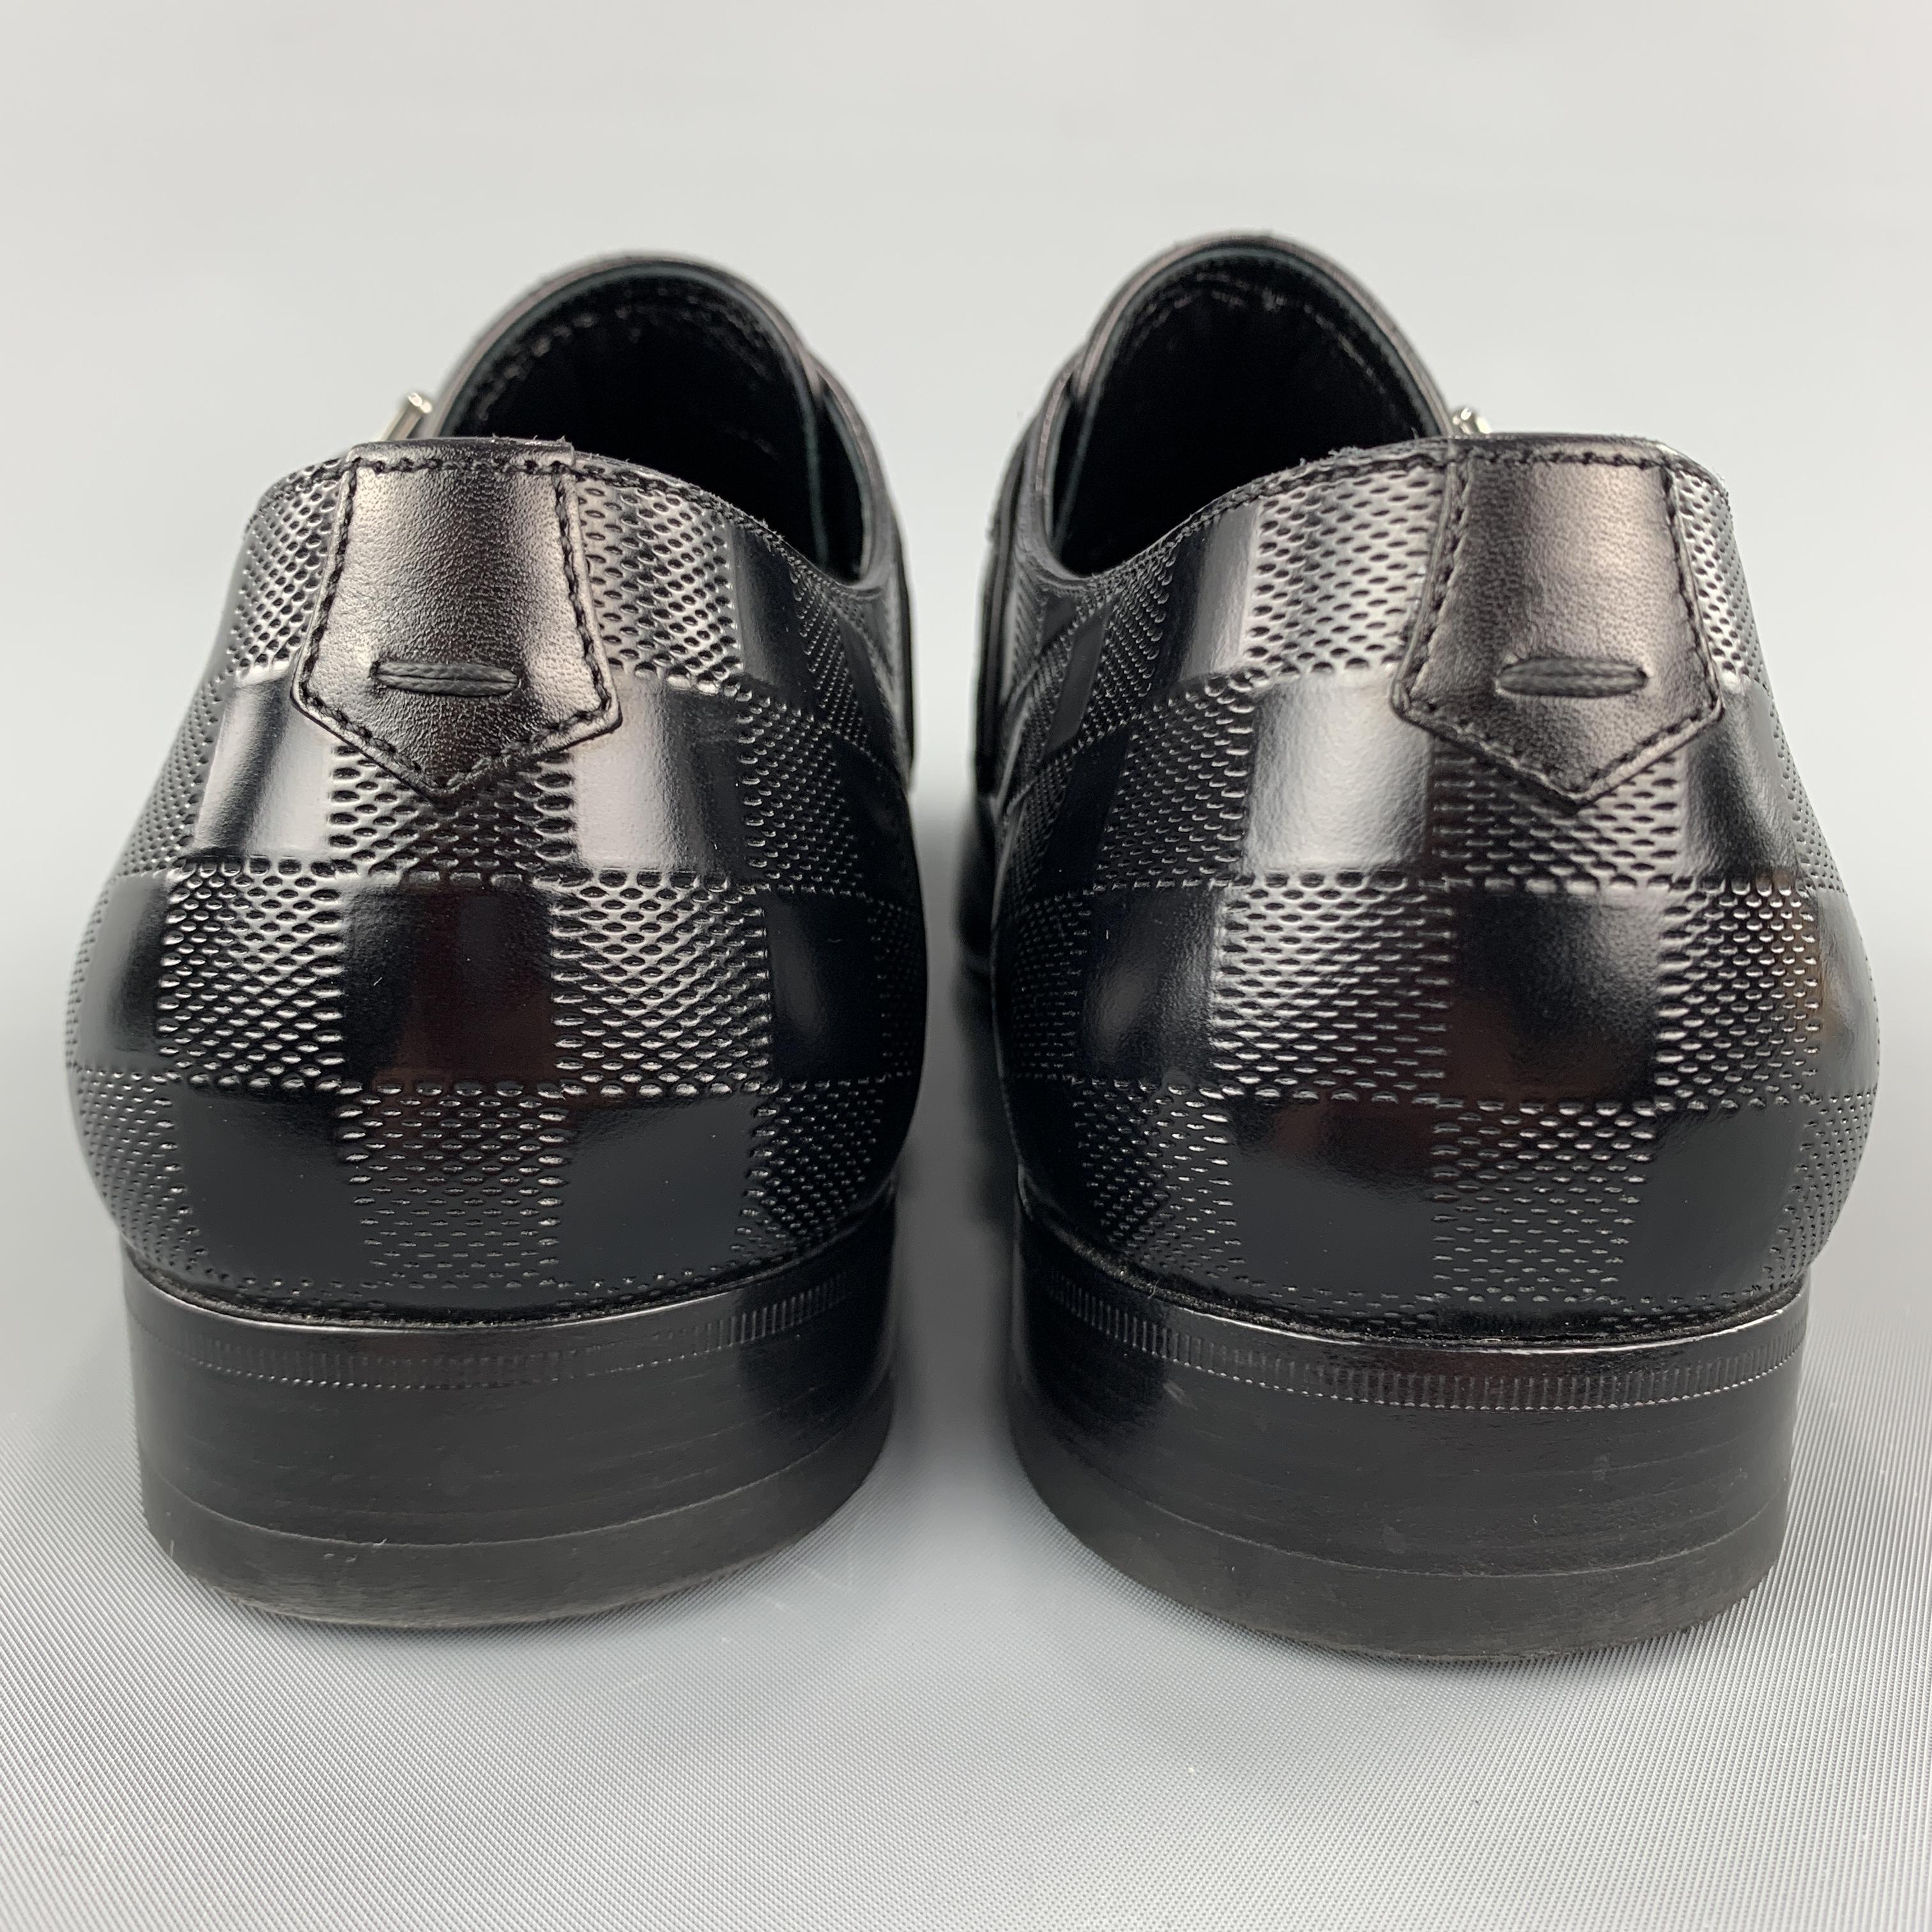 LOUIS VUITTON Size 11.5 Solid Black Leather Monk Strap Loafers 1